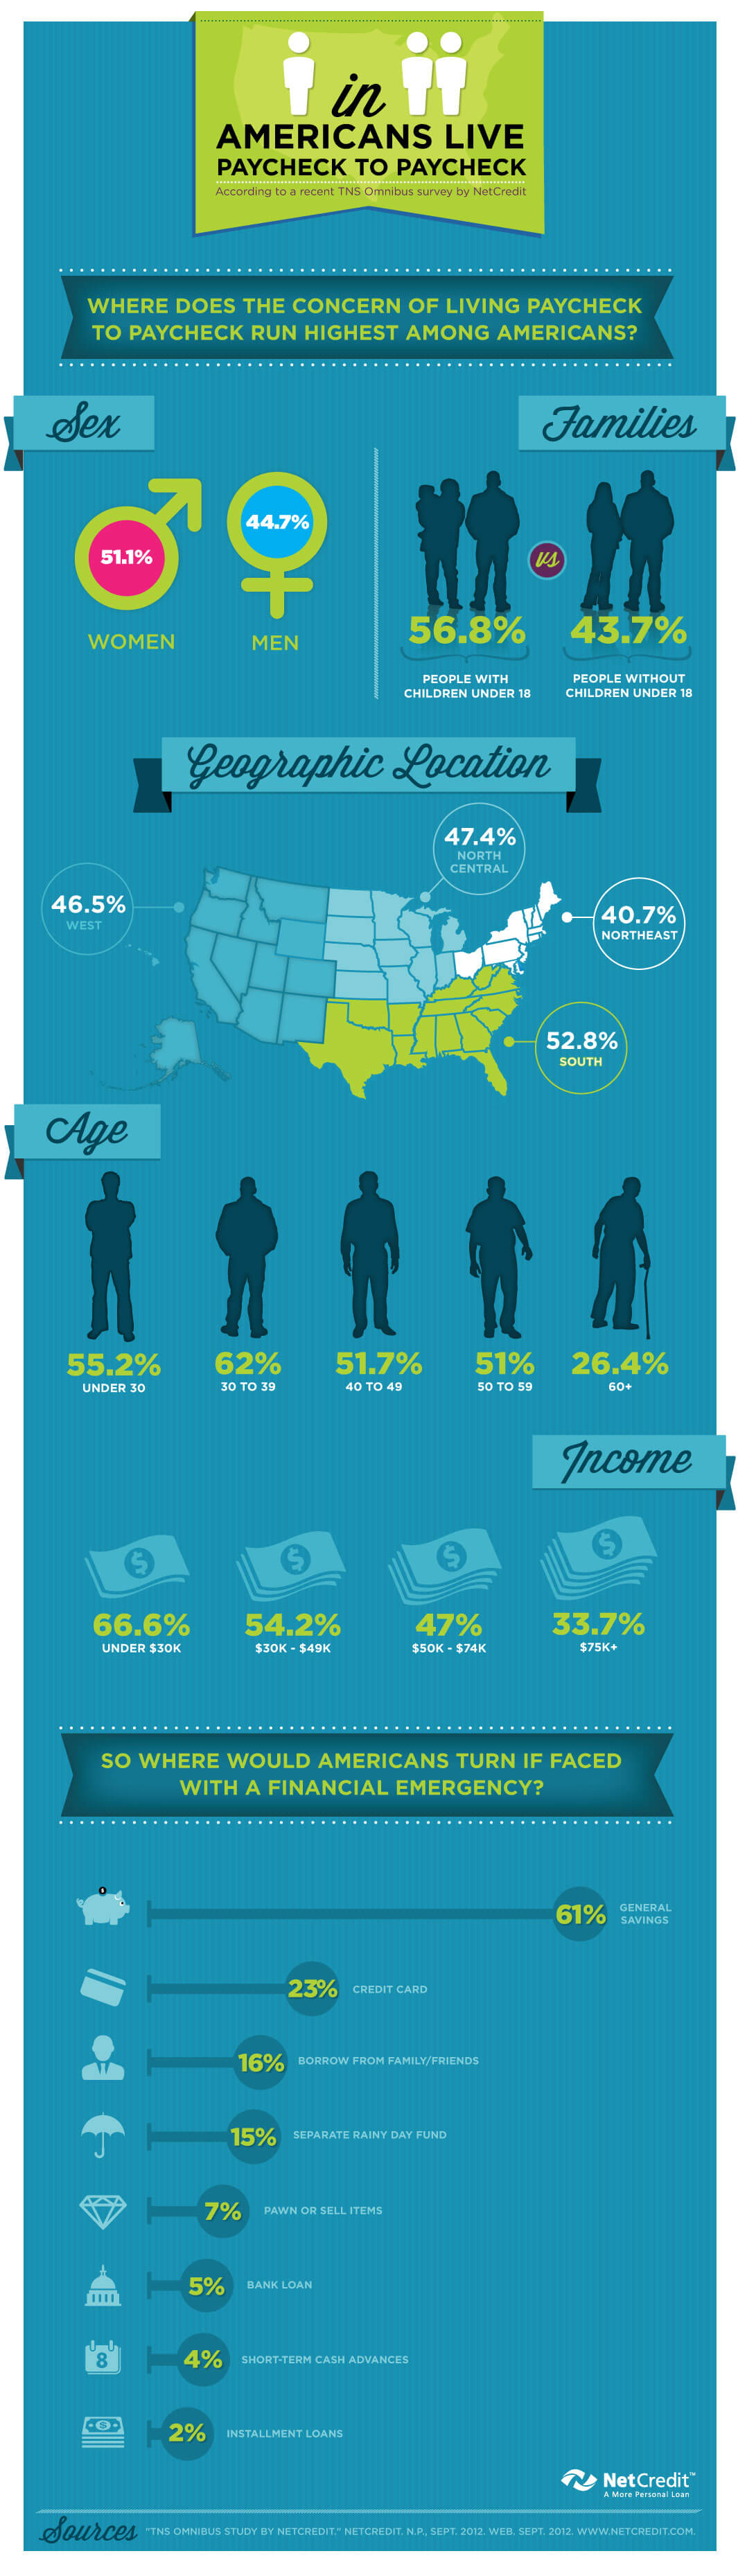 Americans Living Paycheck to Paycheck (Infographic) NetCredit Blog